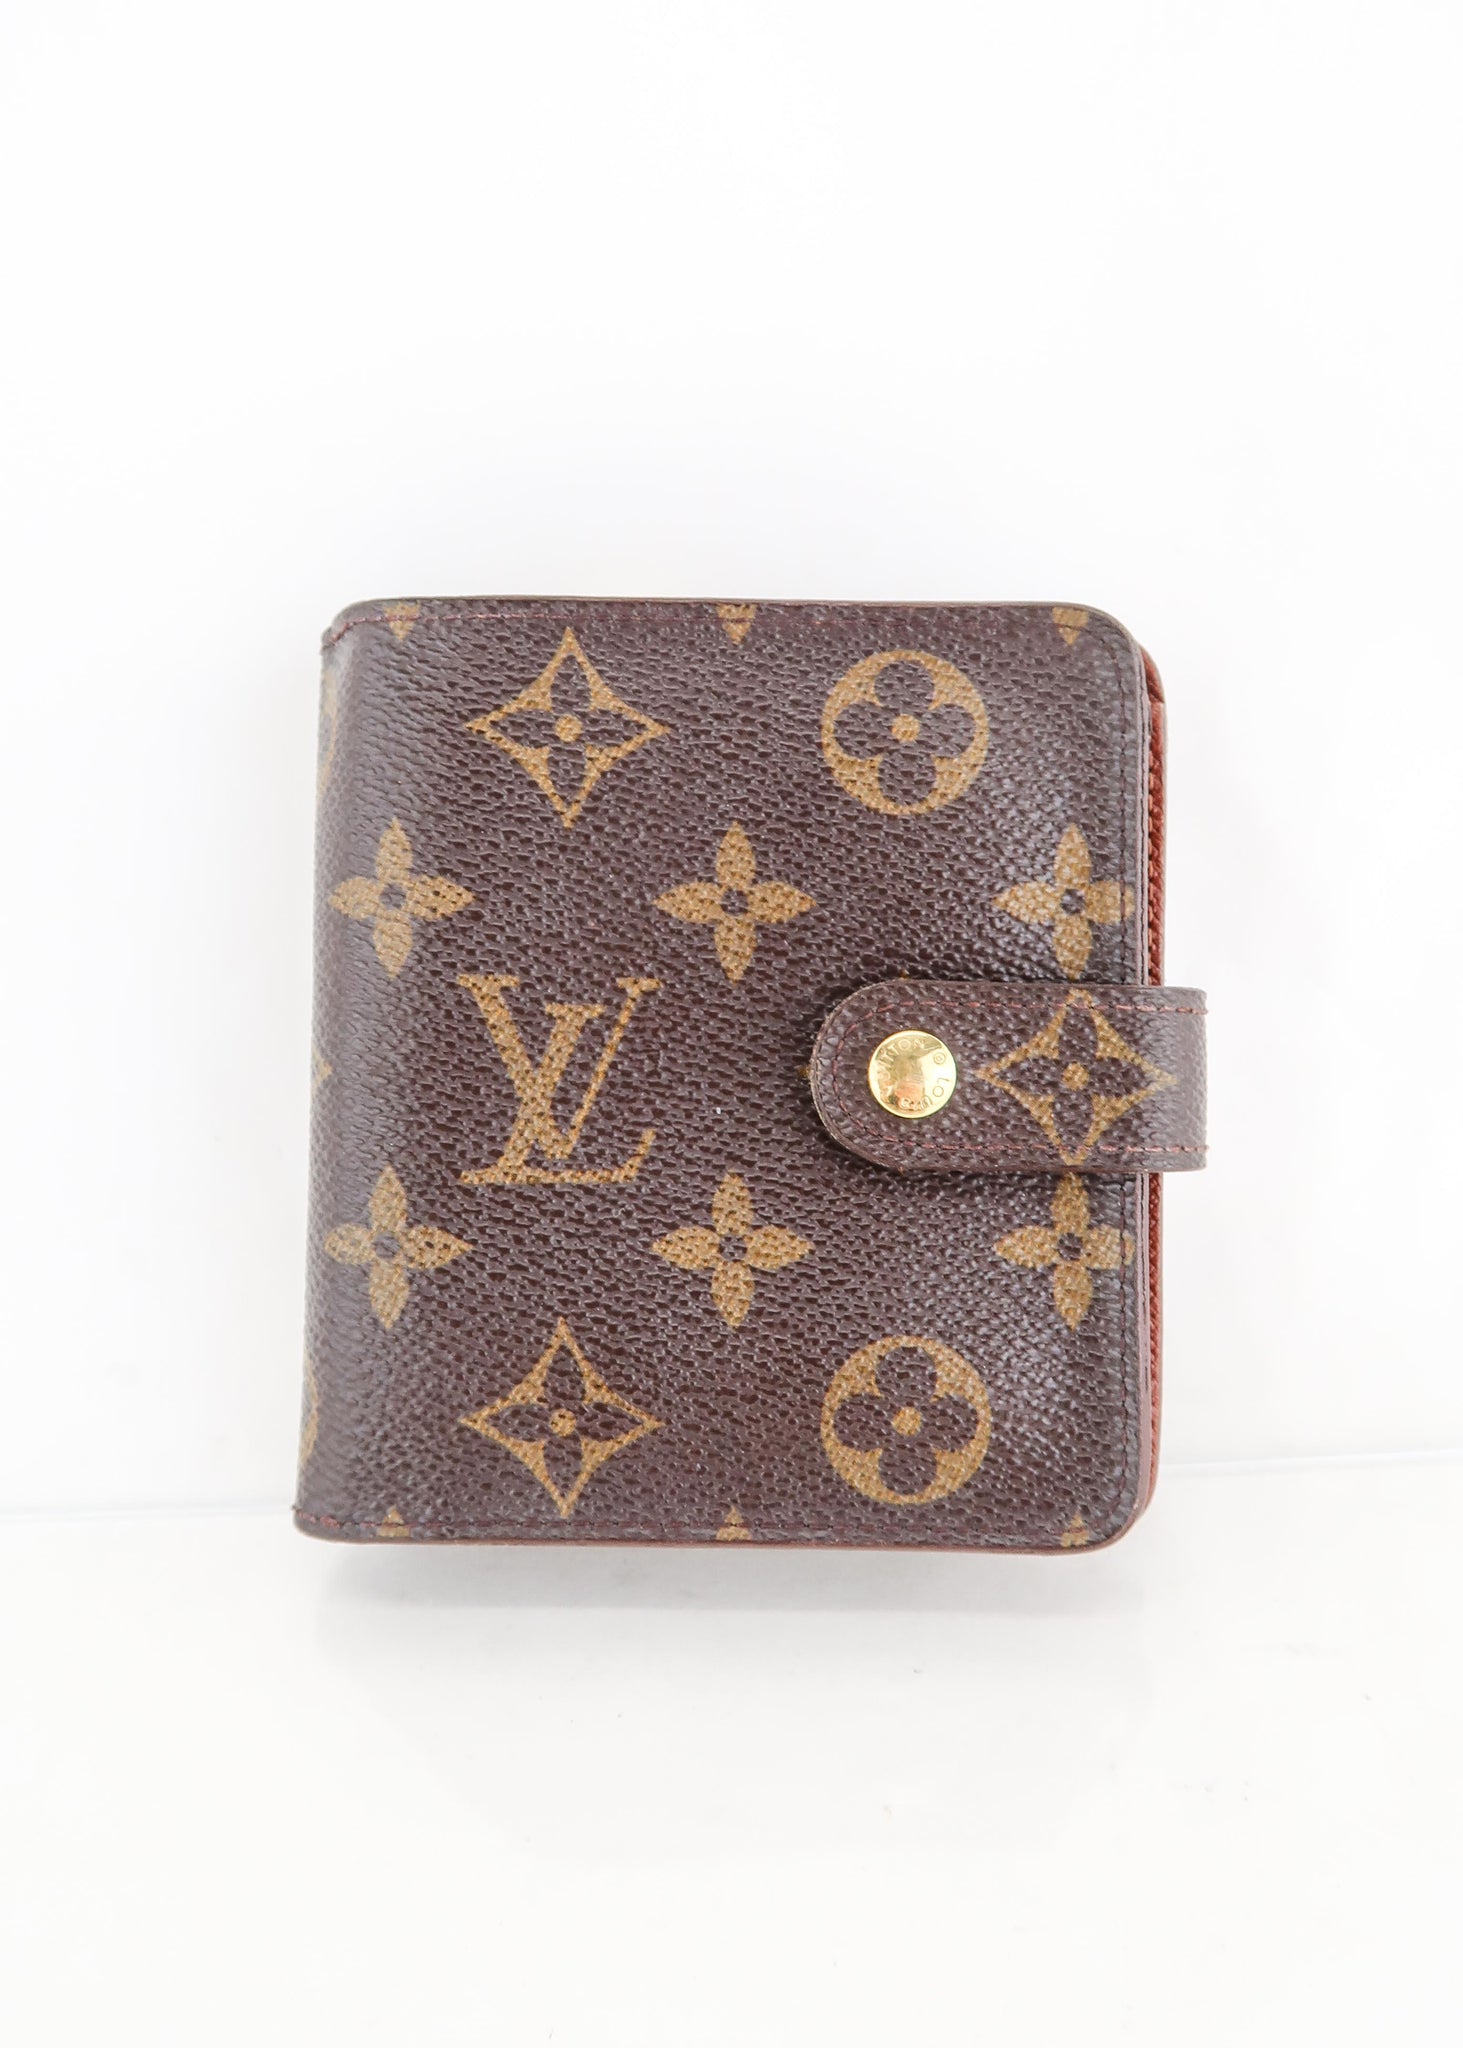 lv wallet compact